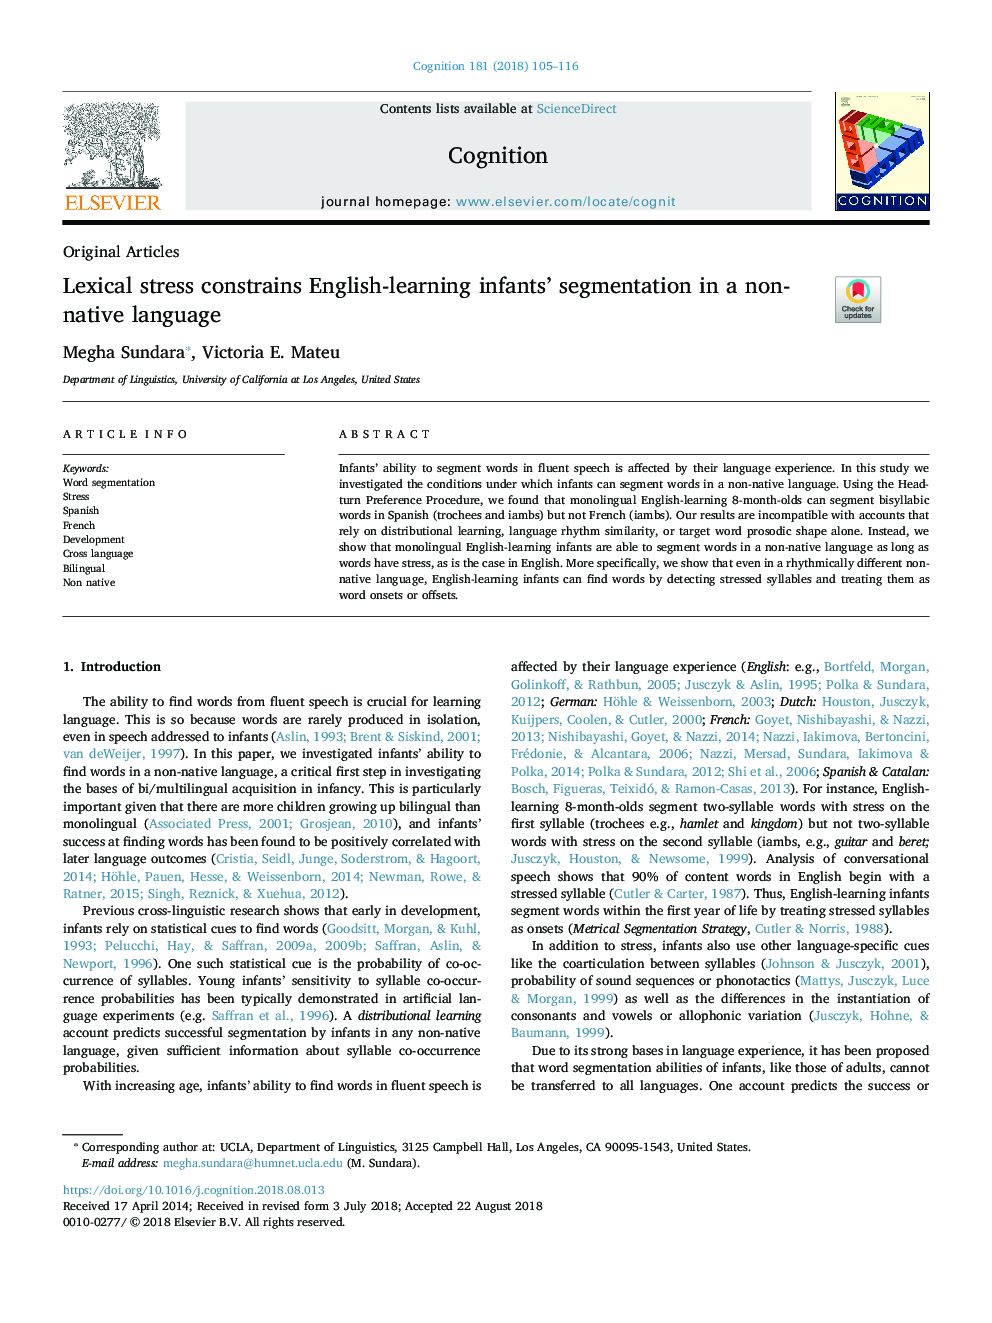 Lexical stress constrains English-learning infants' segmentation in a non-native language